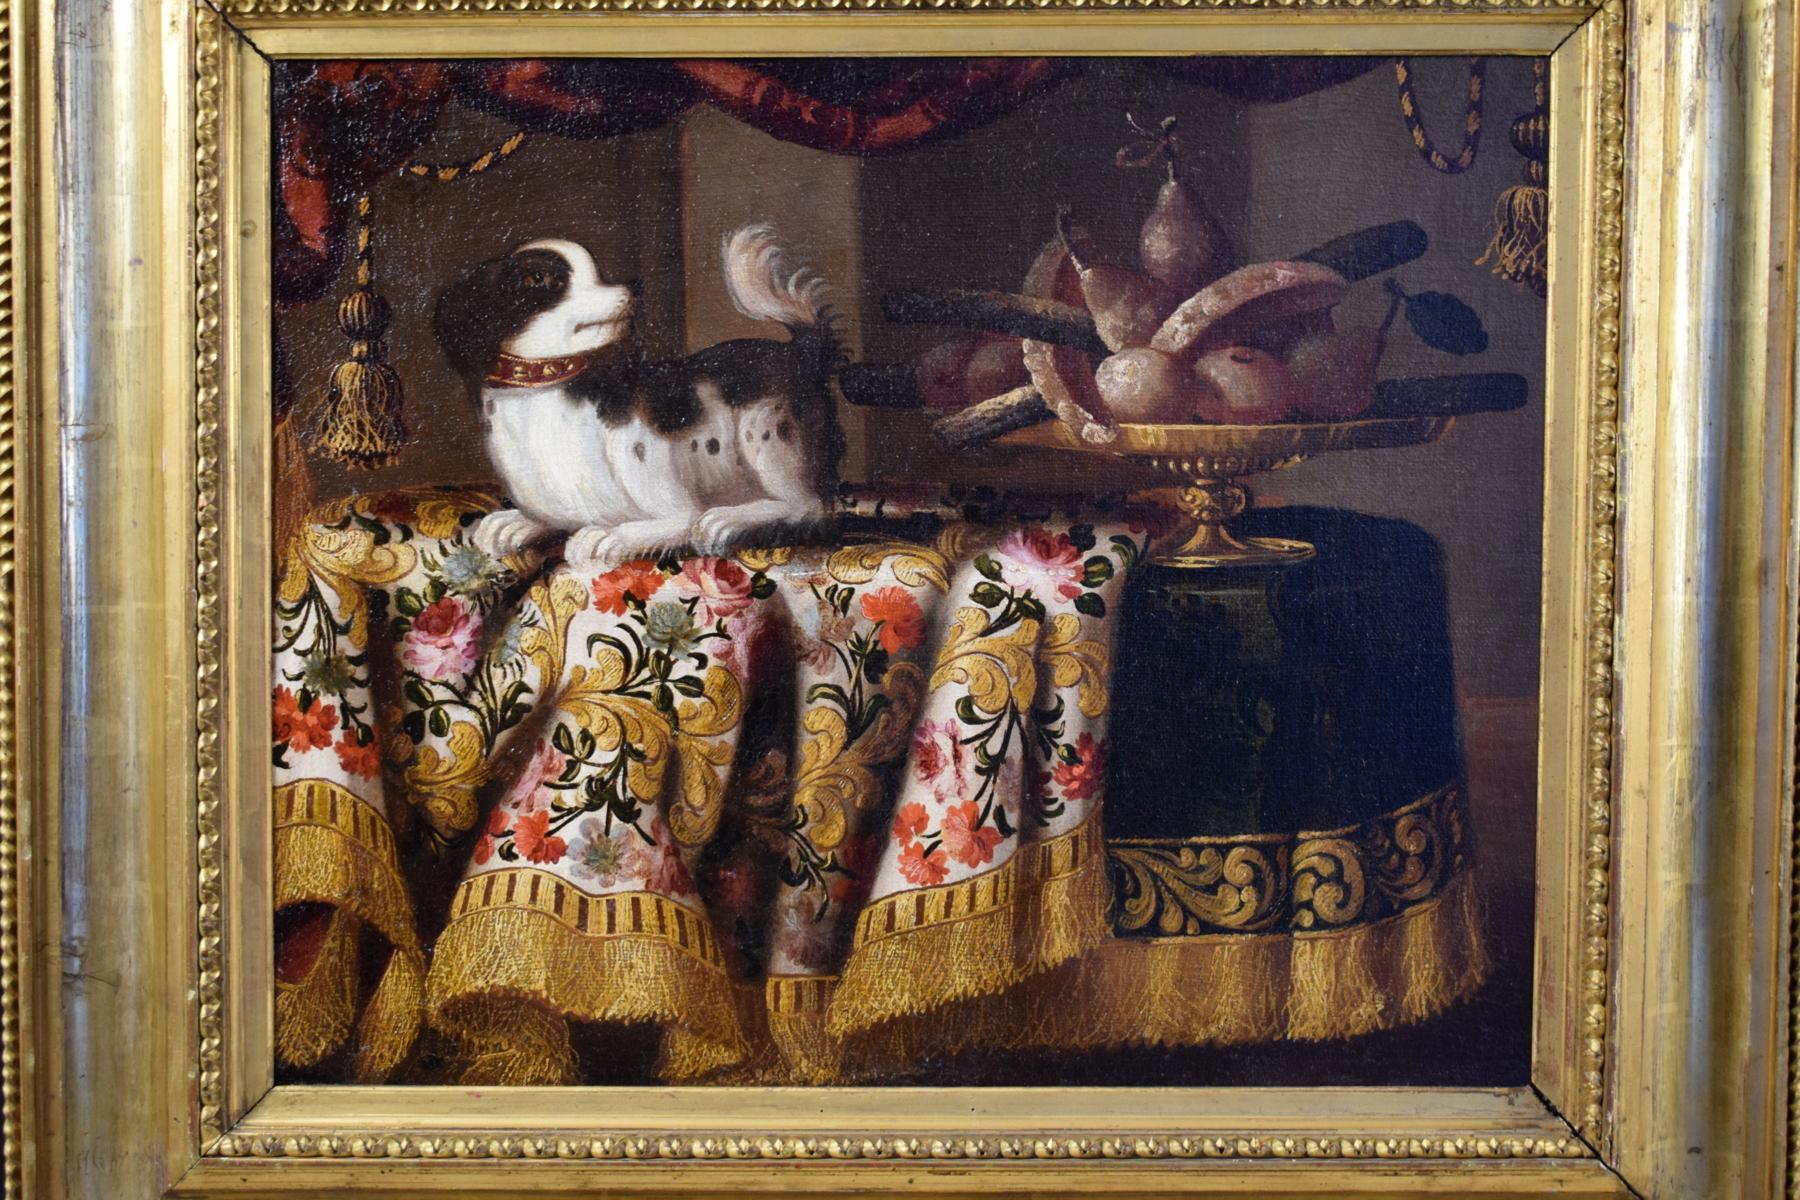 Antonio Gianlisi the younger (1677-1727), 18th century Italian oil painting on canvas, still life with a little dog and some sweets on precious embroidered tissue

Measures: Oil on canvas, cm 55 x 73, with the Frame, cm 84 x 97

The canvas, of